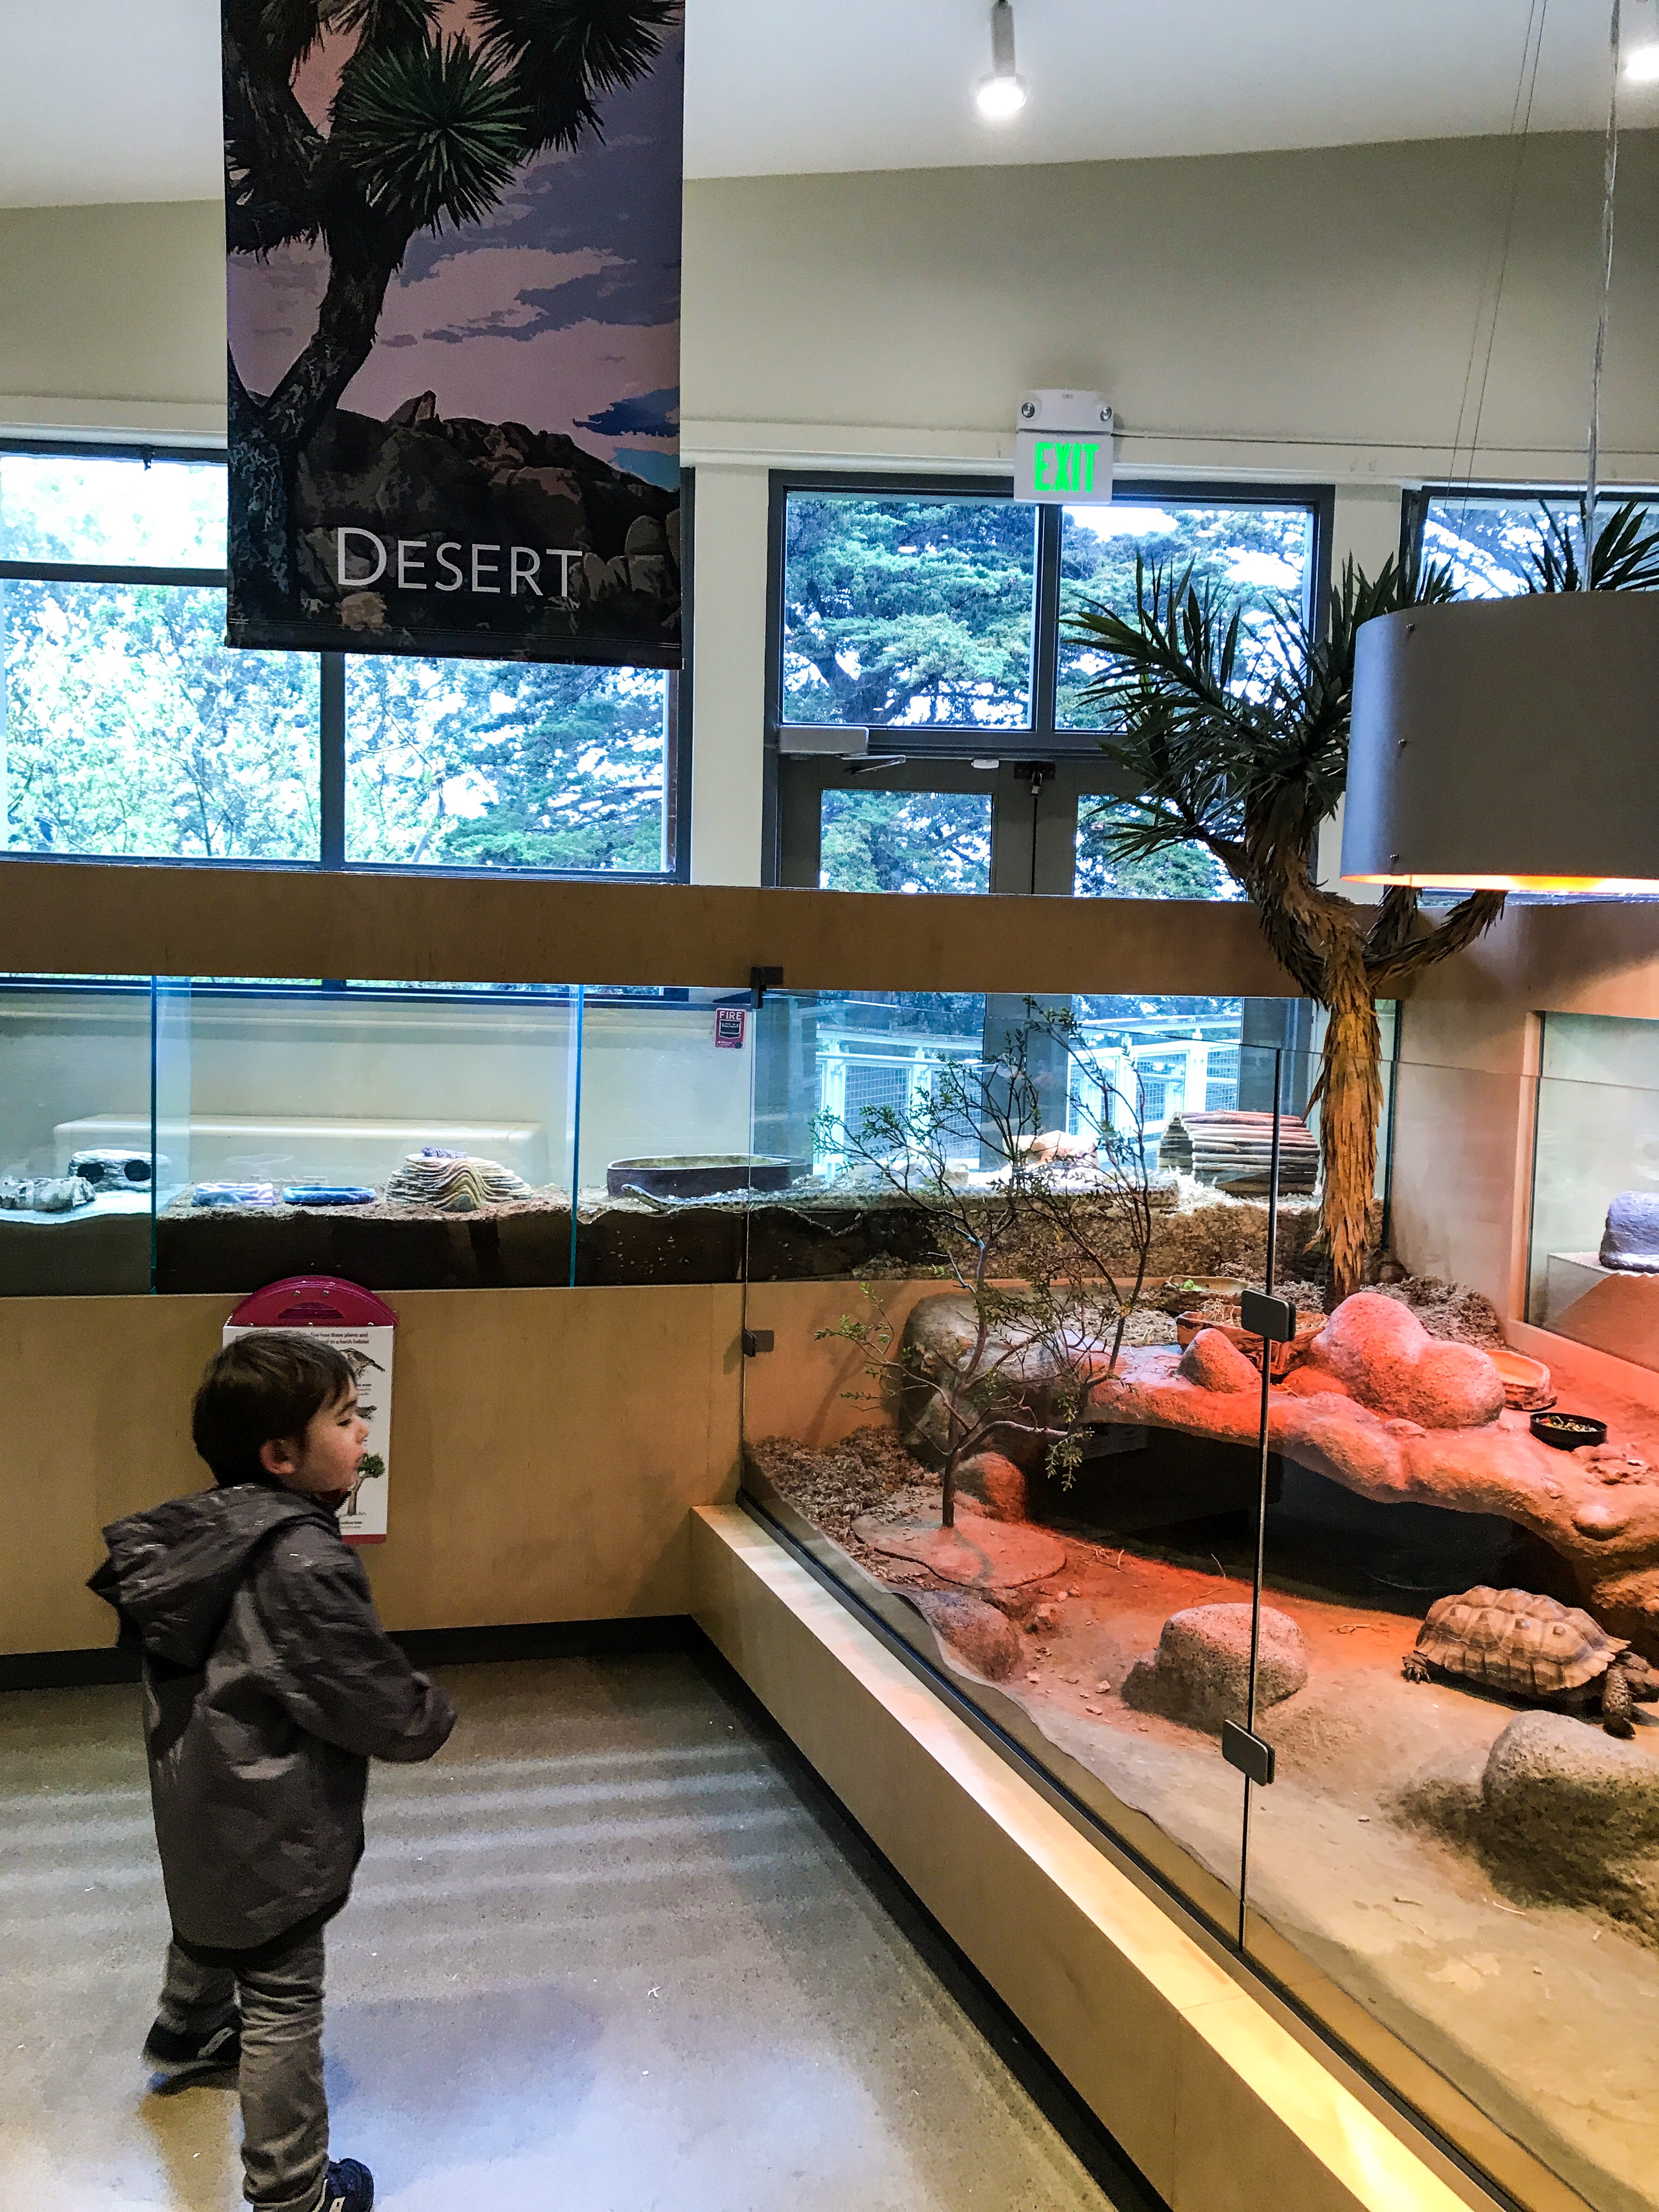 Guide to the Randall Museum in San Francisco | Things to Do in San Francisco with Kids | Henry and Andrew’s Guide (www.henryandandrewsguide.com)